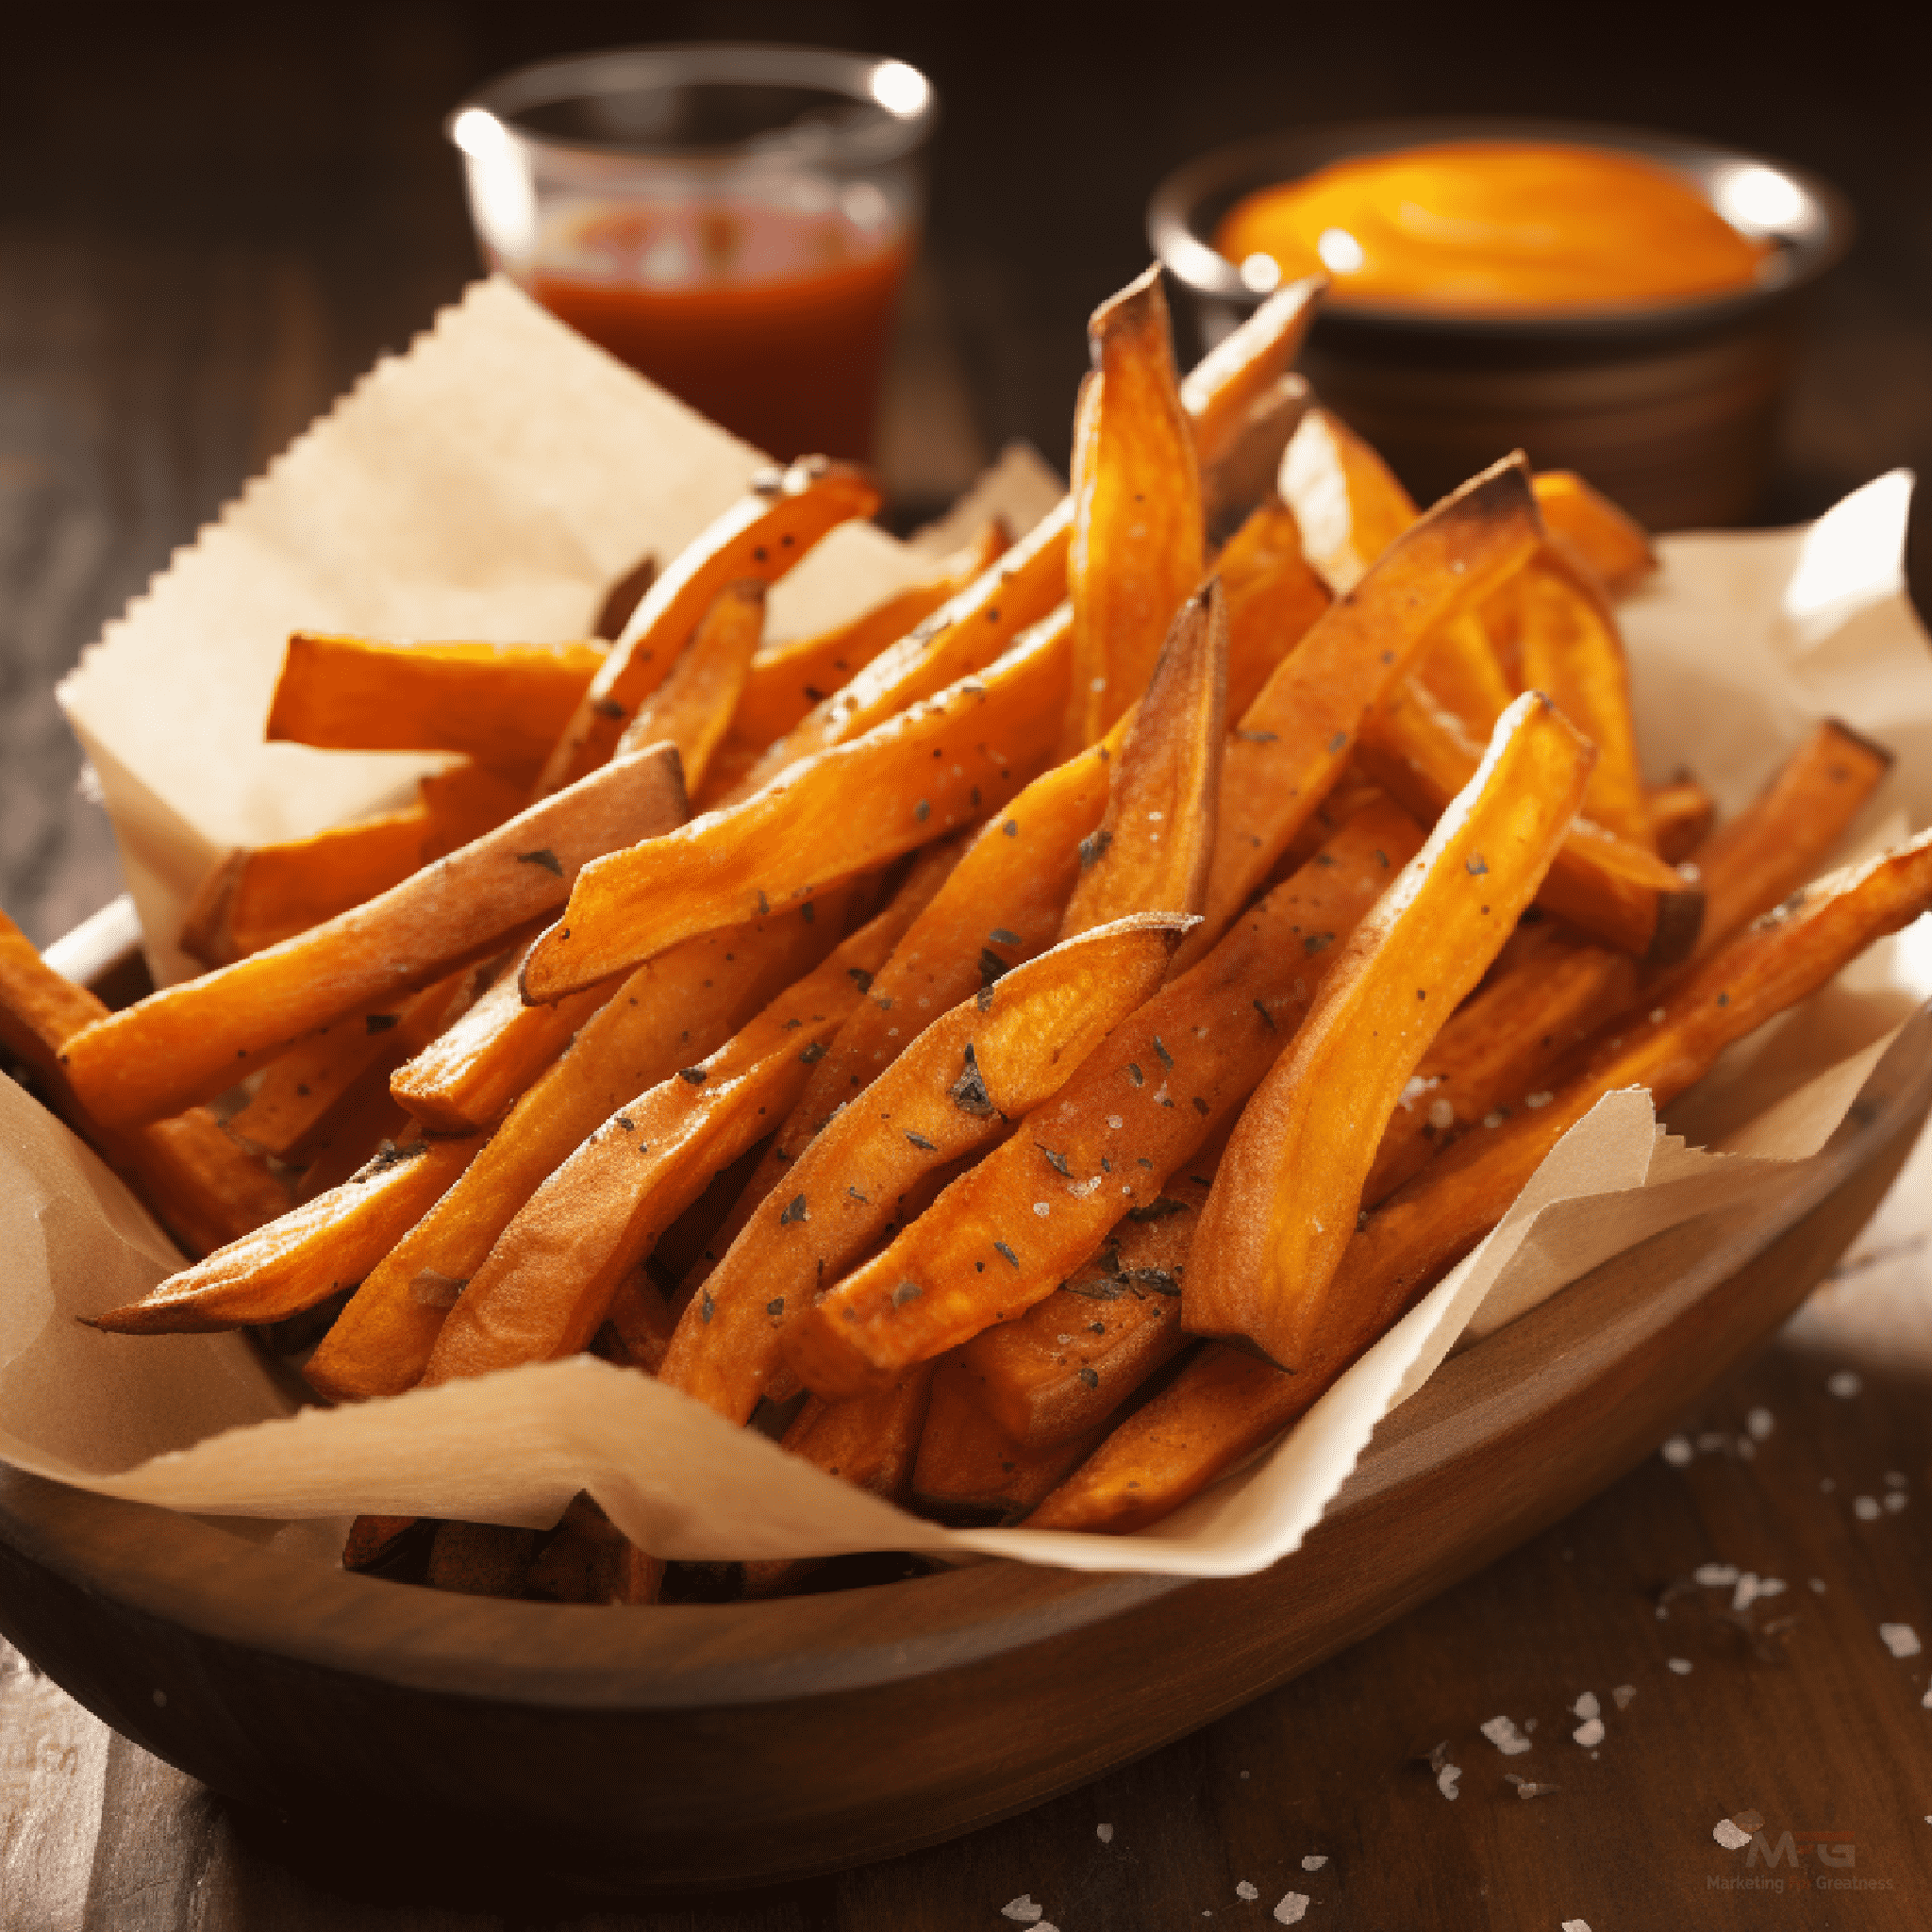 Sweet potato fries: Rich in vitamin A and fiber, sweet potatoes offer a sweet, nutritious twist on classic fries.